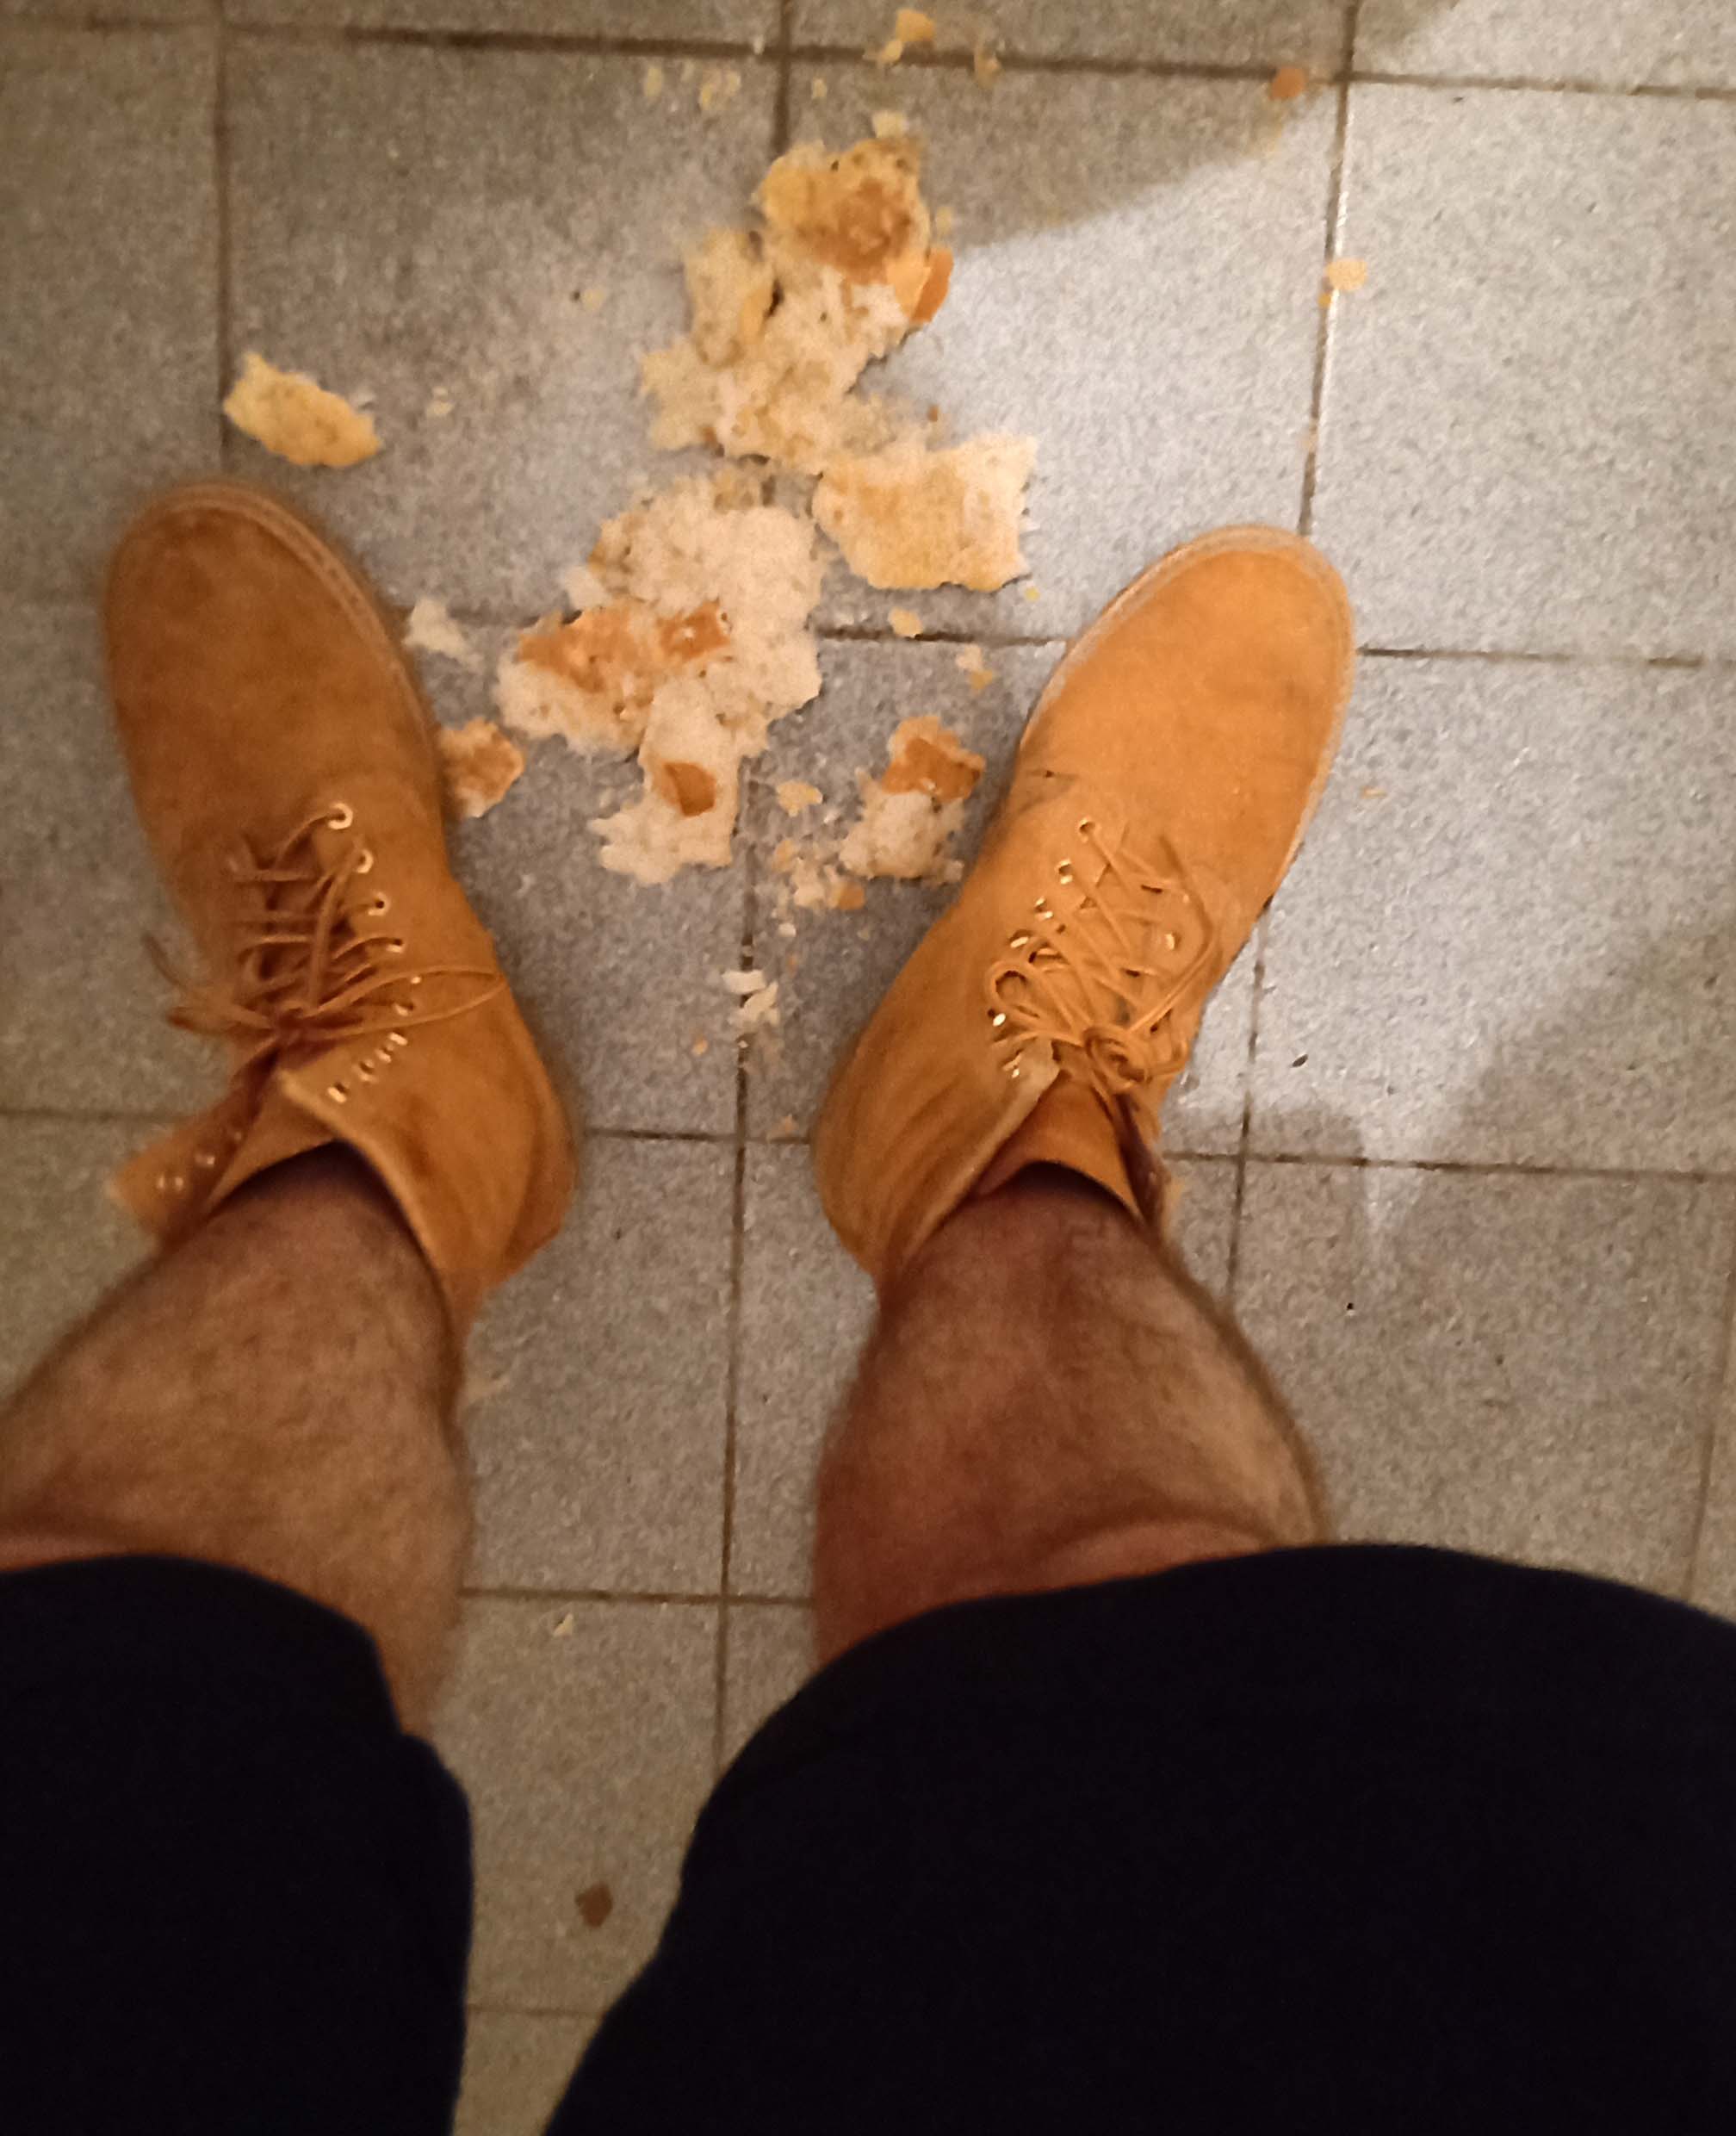 crushing bread w/boots